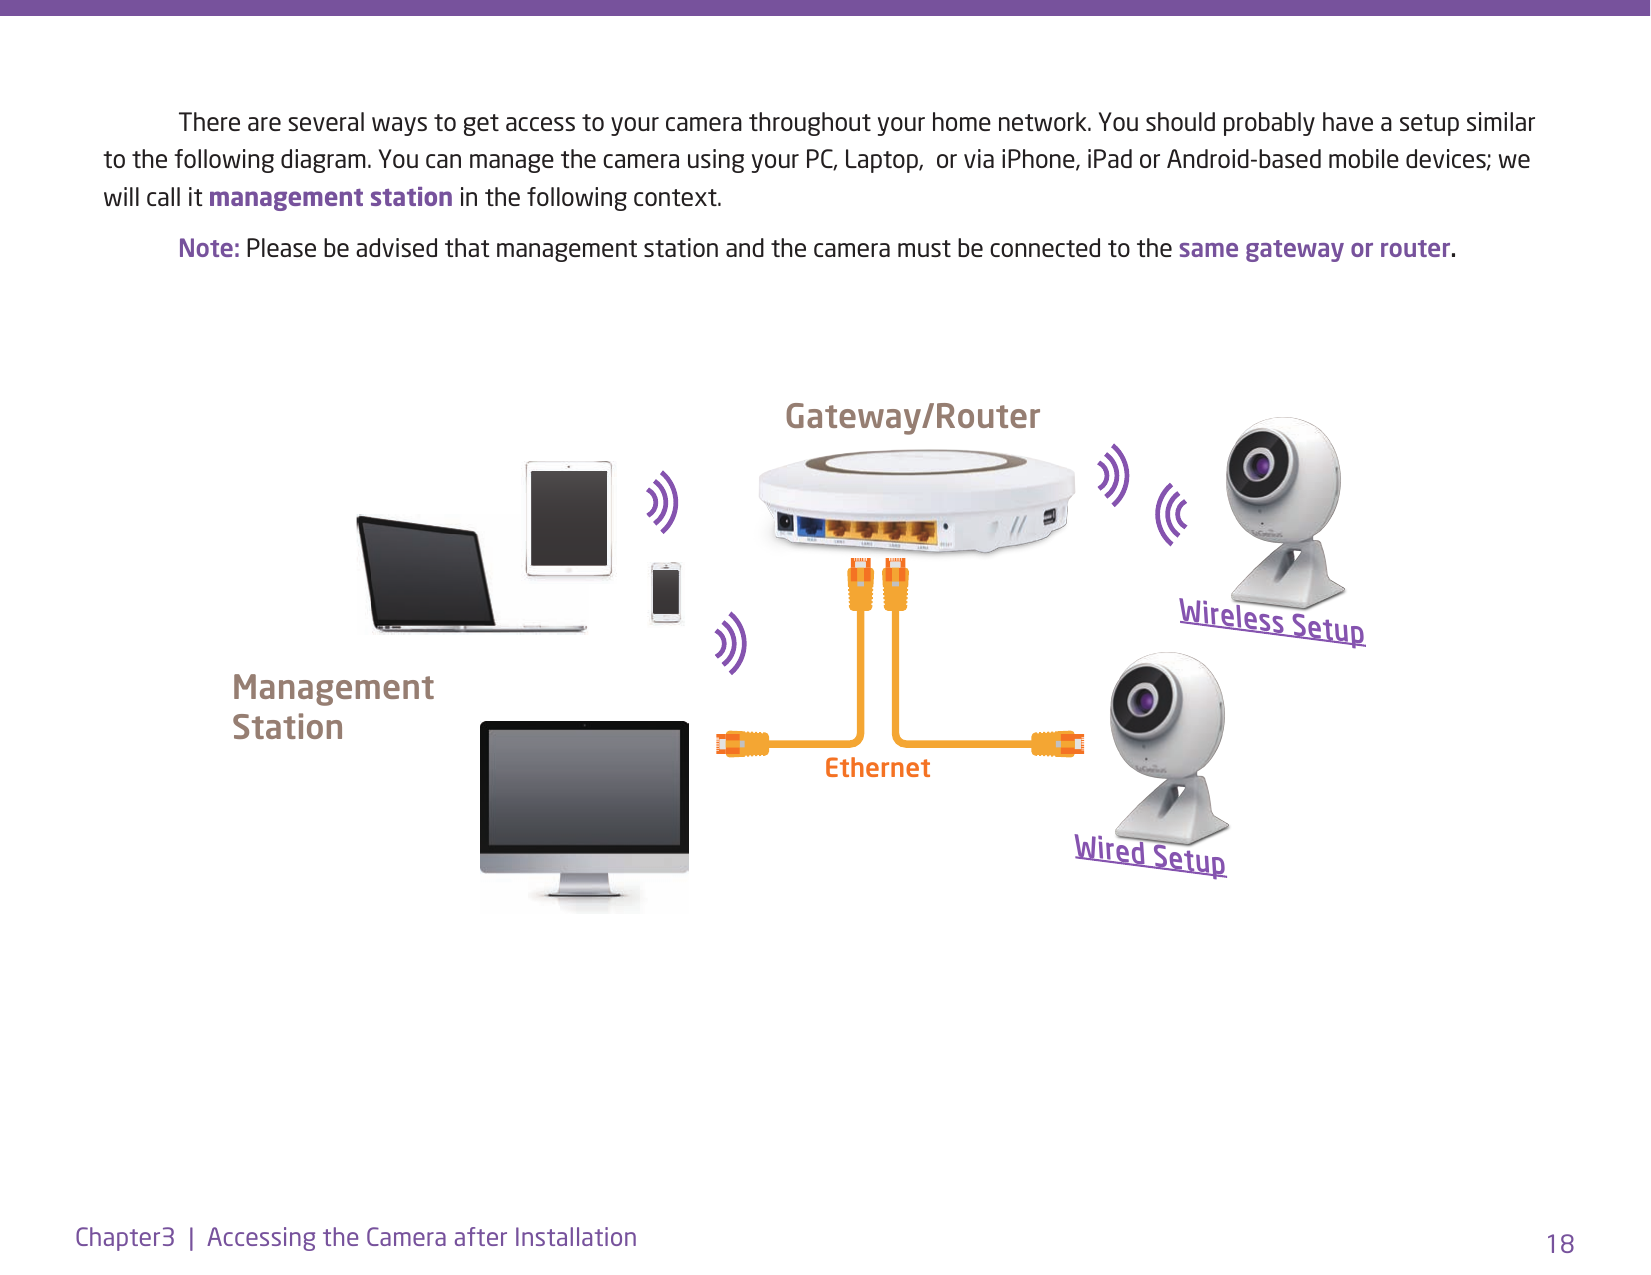 18Chapter3  |  Accessing the Camera after Installation  There are several ways to get access to your camera throughout your home network. You should probably have a setup similar to the following diagram. You can manage the camera using your PC, Laptop,  or via iPhone, iPad or Android-based mobile devices; we will call it management station in the following context.  Note: Please be advised that management station and the camera must be connected to the same gateway or router. EthernetGateway/RouterManagement StationWireless SetupWired Setup